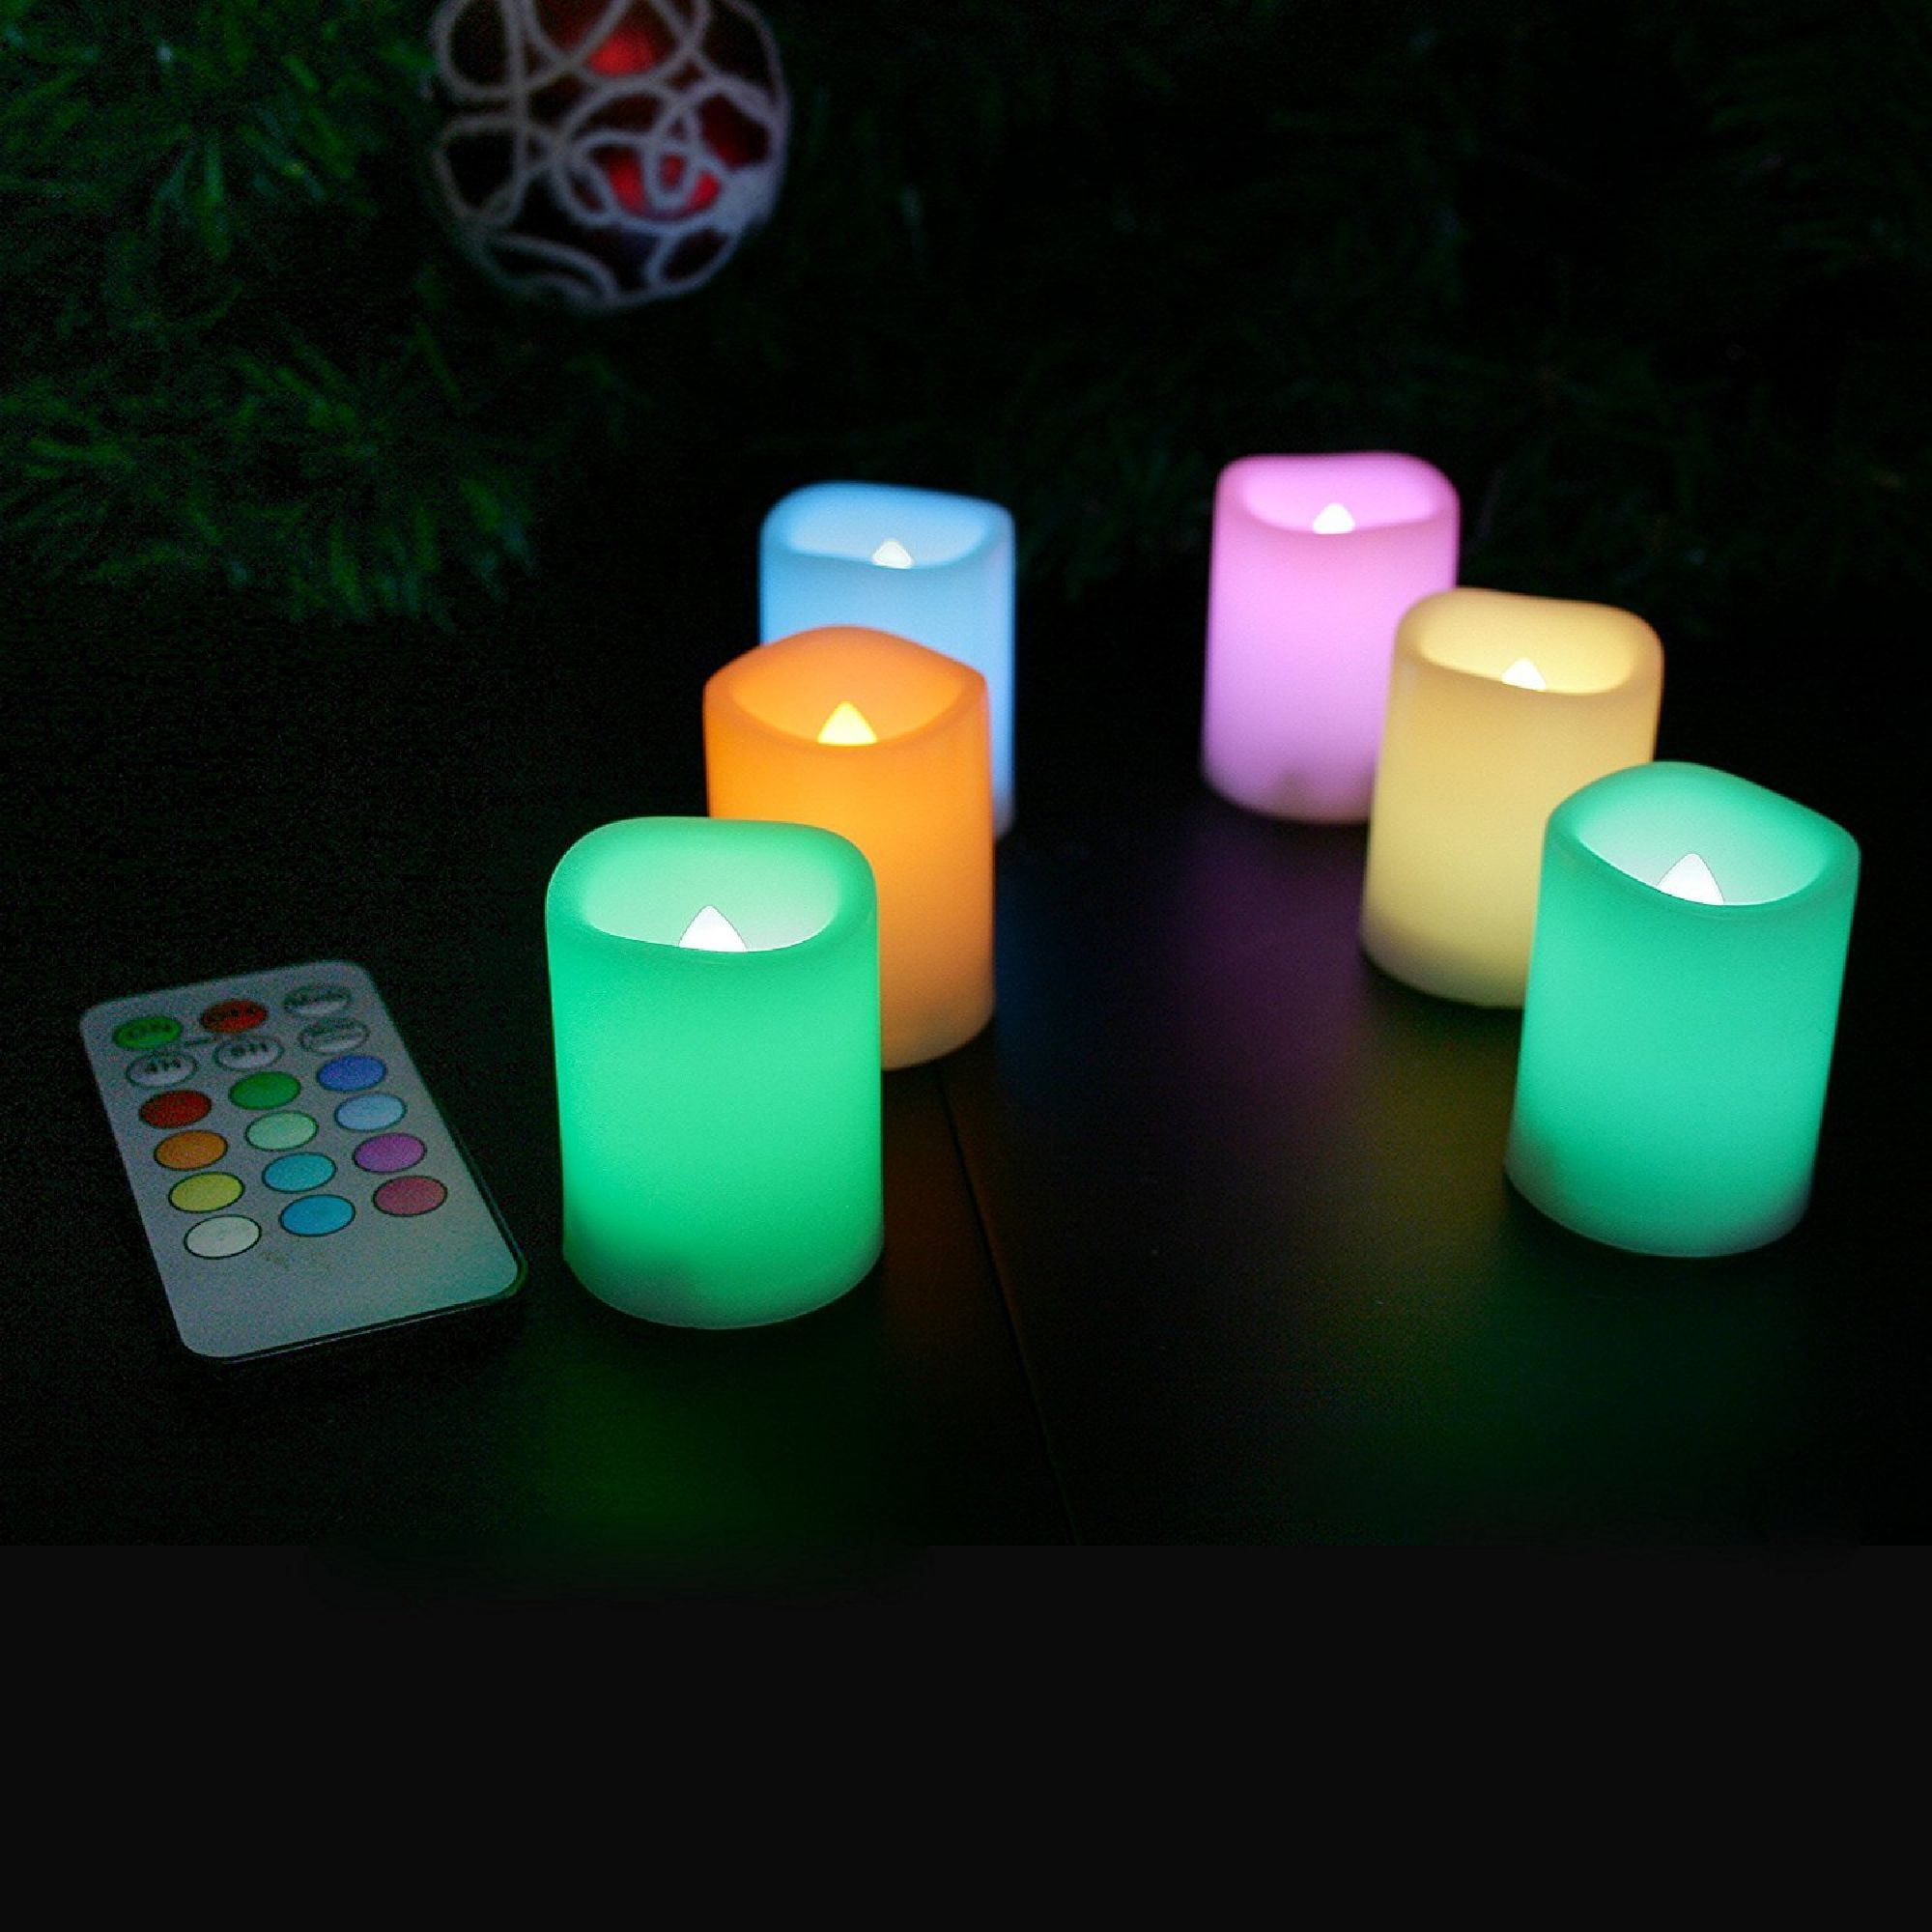 1.5x2,12-Pack Qidea Battery Operated Flameless LED Votive Candles with Timer Flickering Electric Decorative Decor Fake Candle Lights for Xmas Christmas Wedding Party Event Batteries Included 